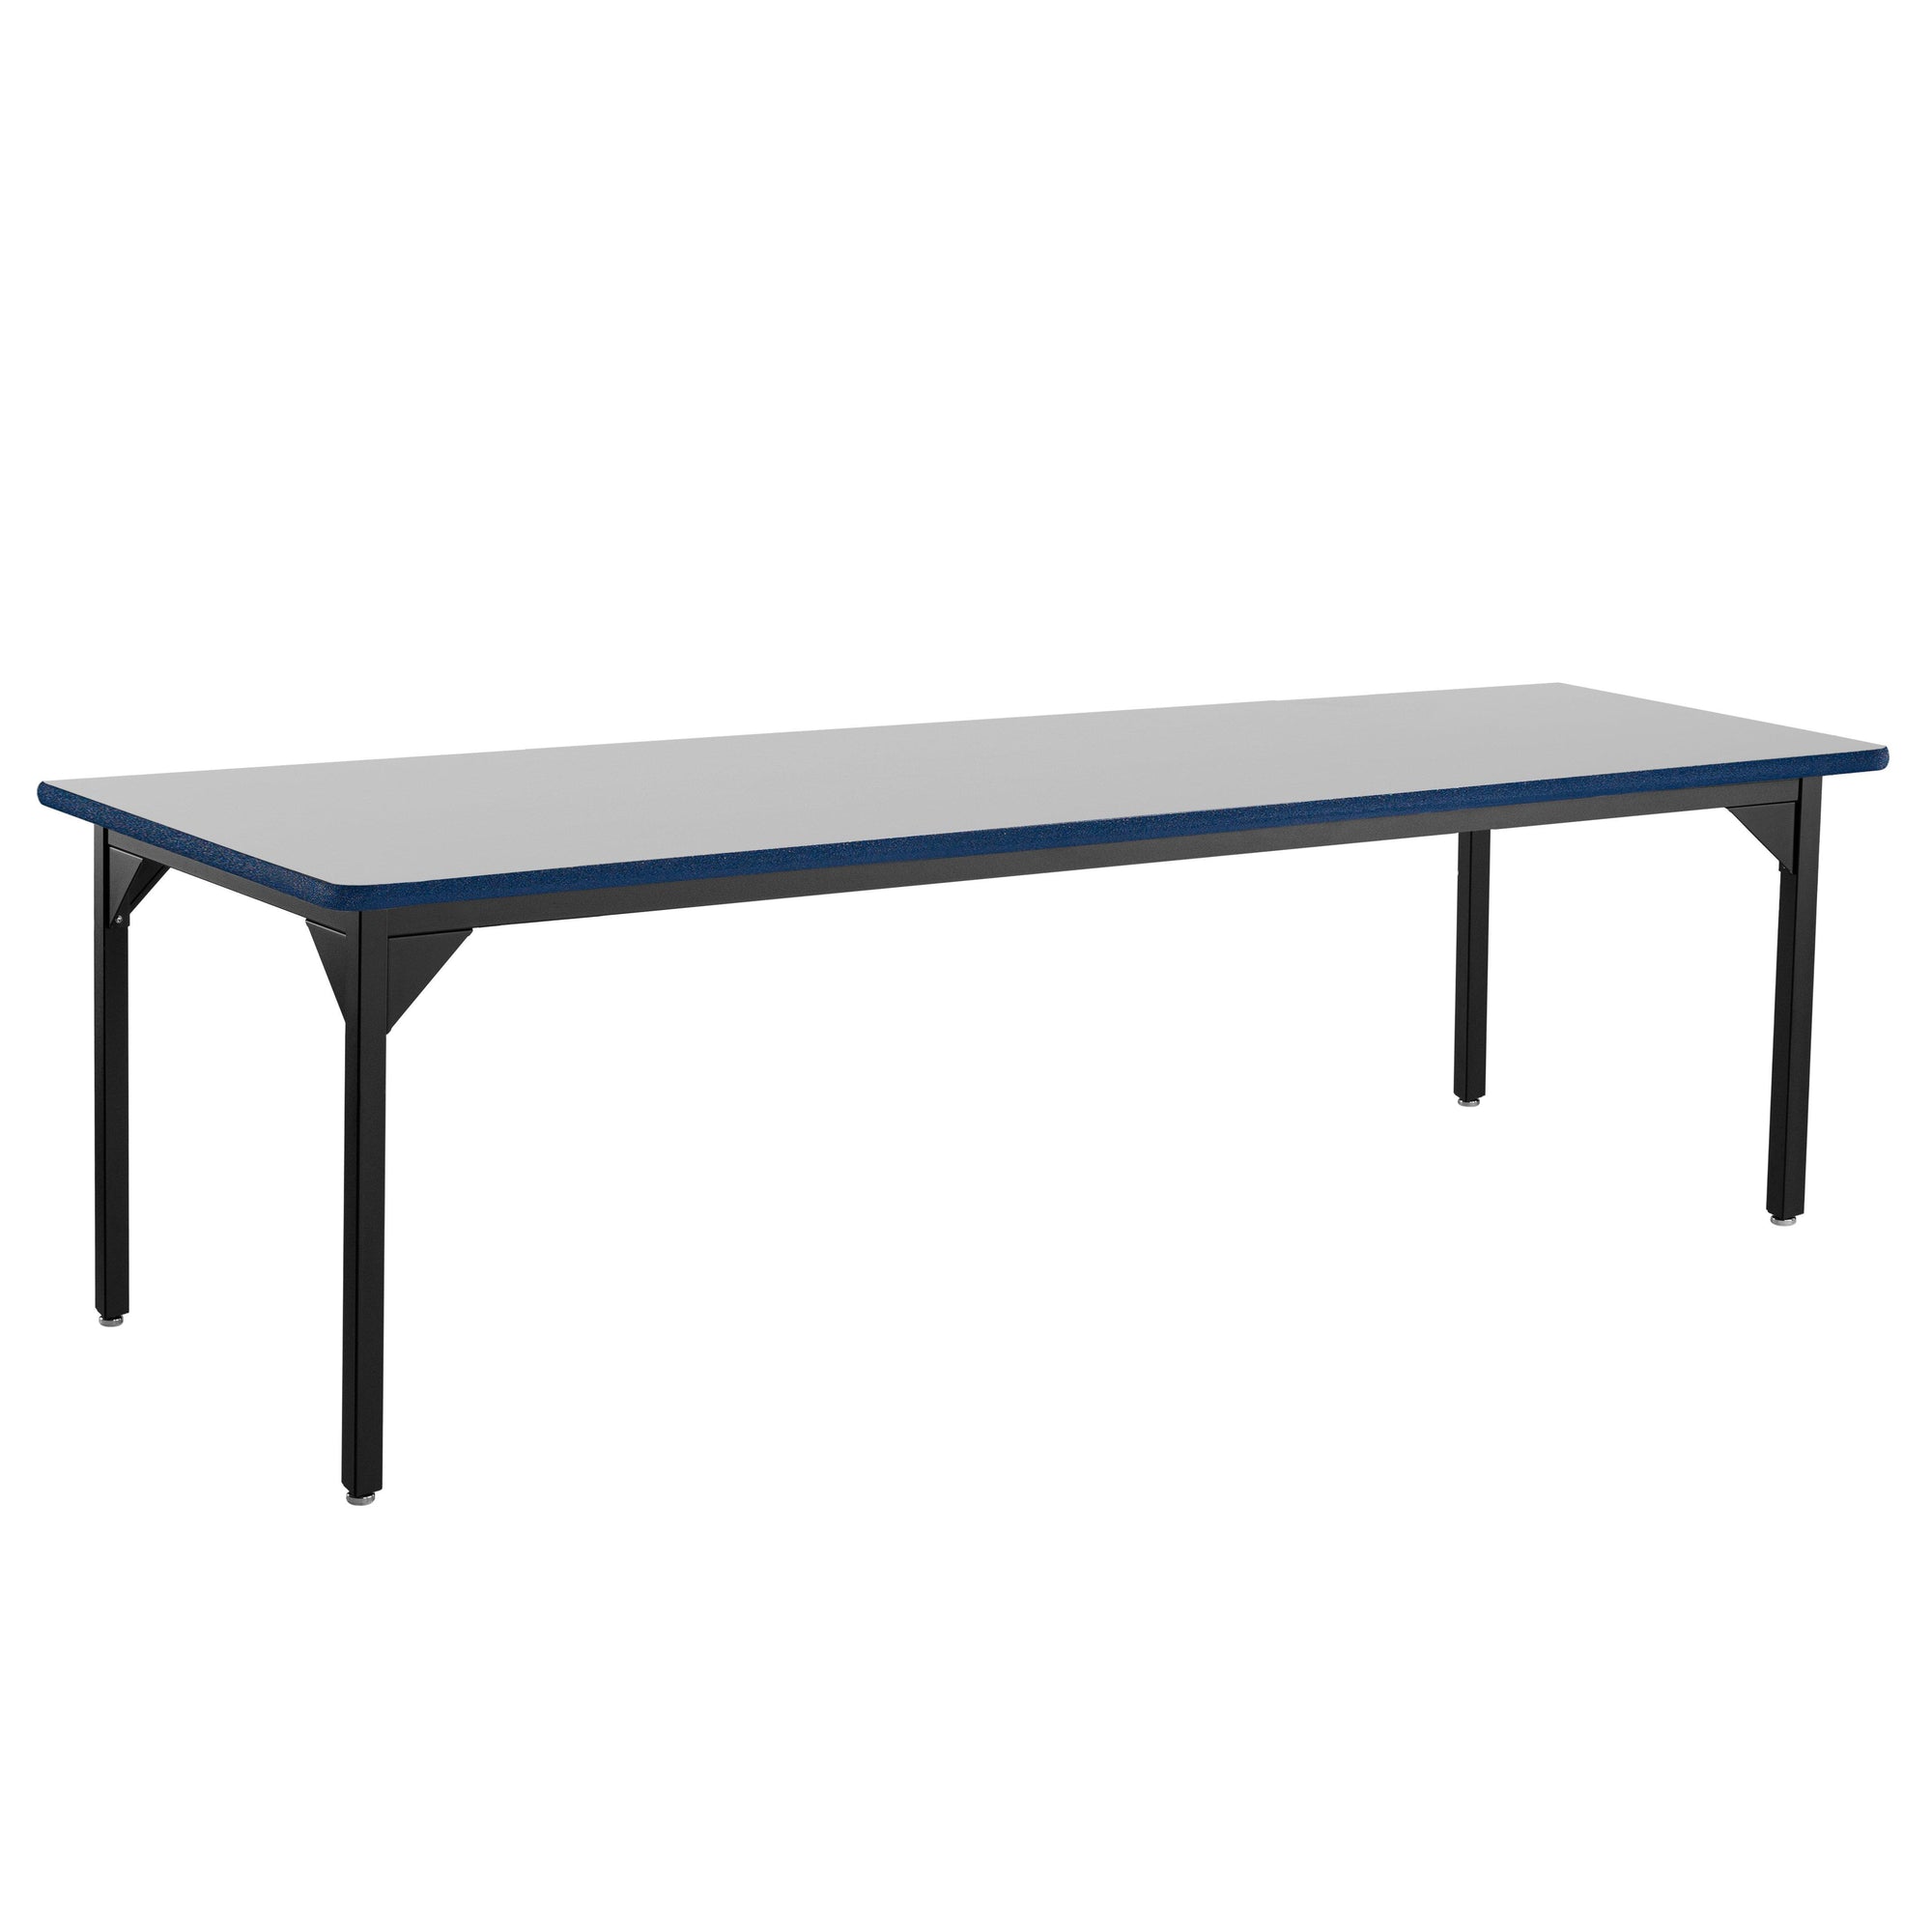 Heavy-Duty Fixed Height Utility Table, Black Frame, 42" x 72", Supreme High-Pressure Laminate Top with Black ProtectEdge